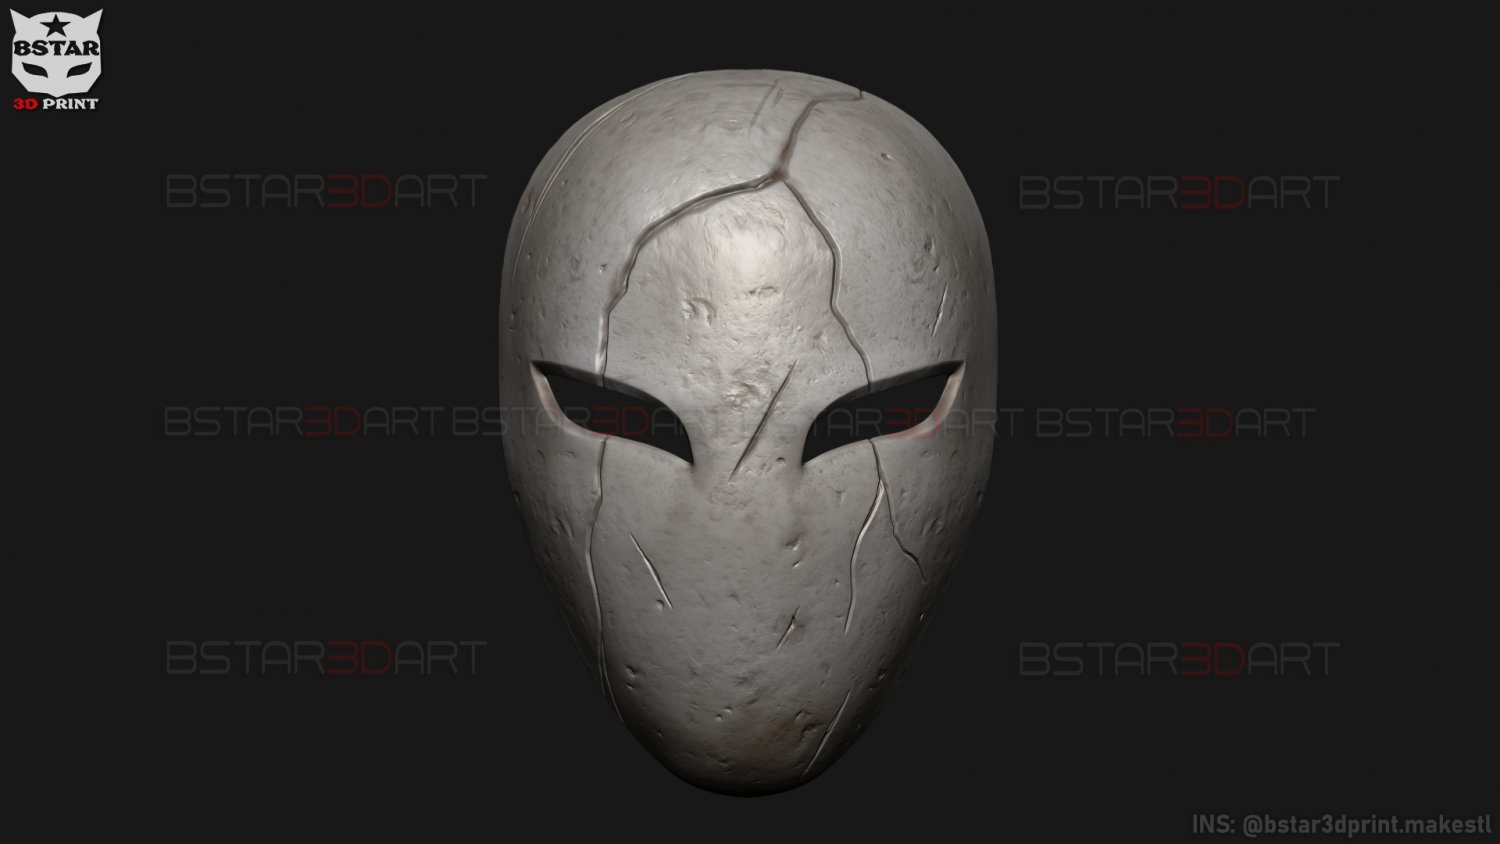 Neon White Game Cosplay Mask 3D Print Model File STL 